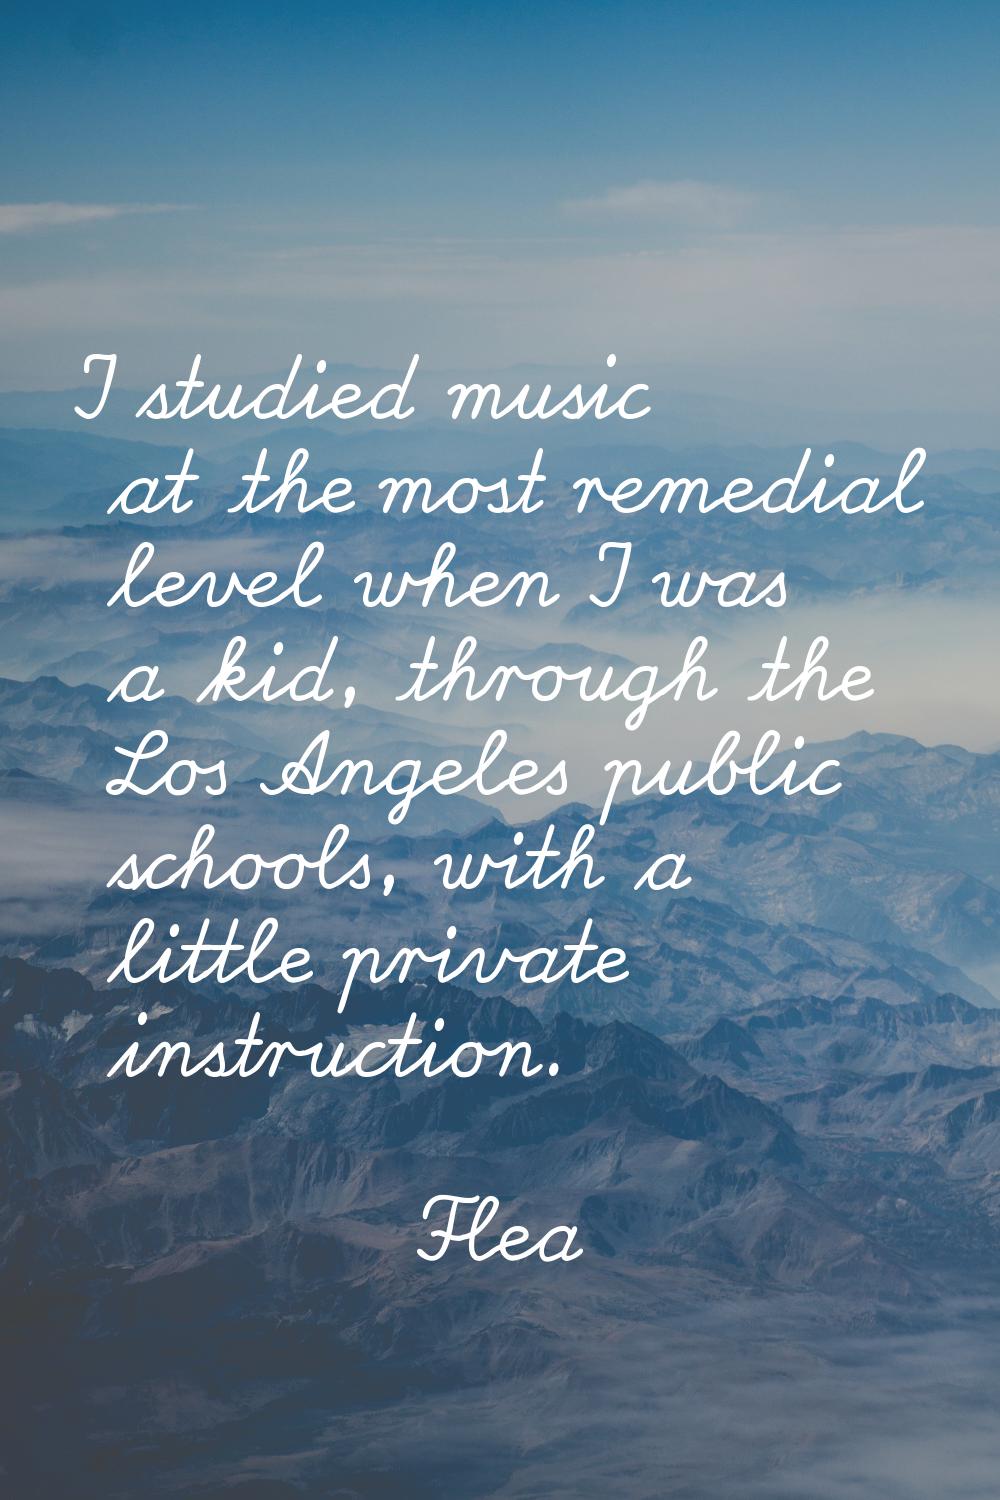 I studied music at the most remedial level when I was a kid, through the Los Angeles public schools